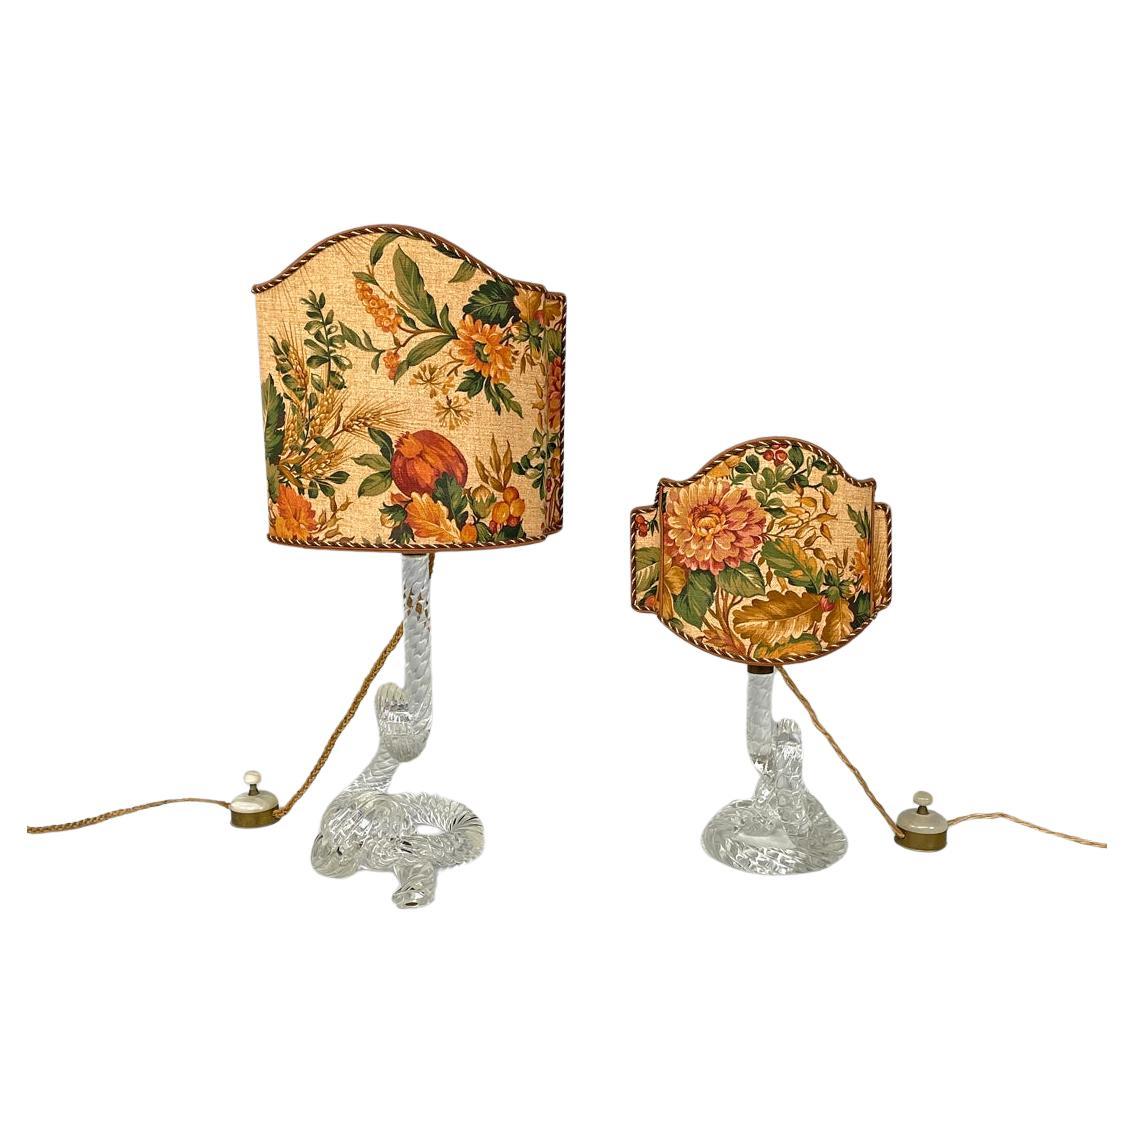 Italian Art Deco table lamps by Seguso in Murano glass and floral fabric, 1930s For Sale